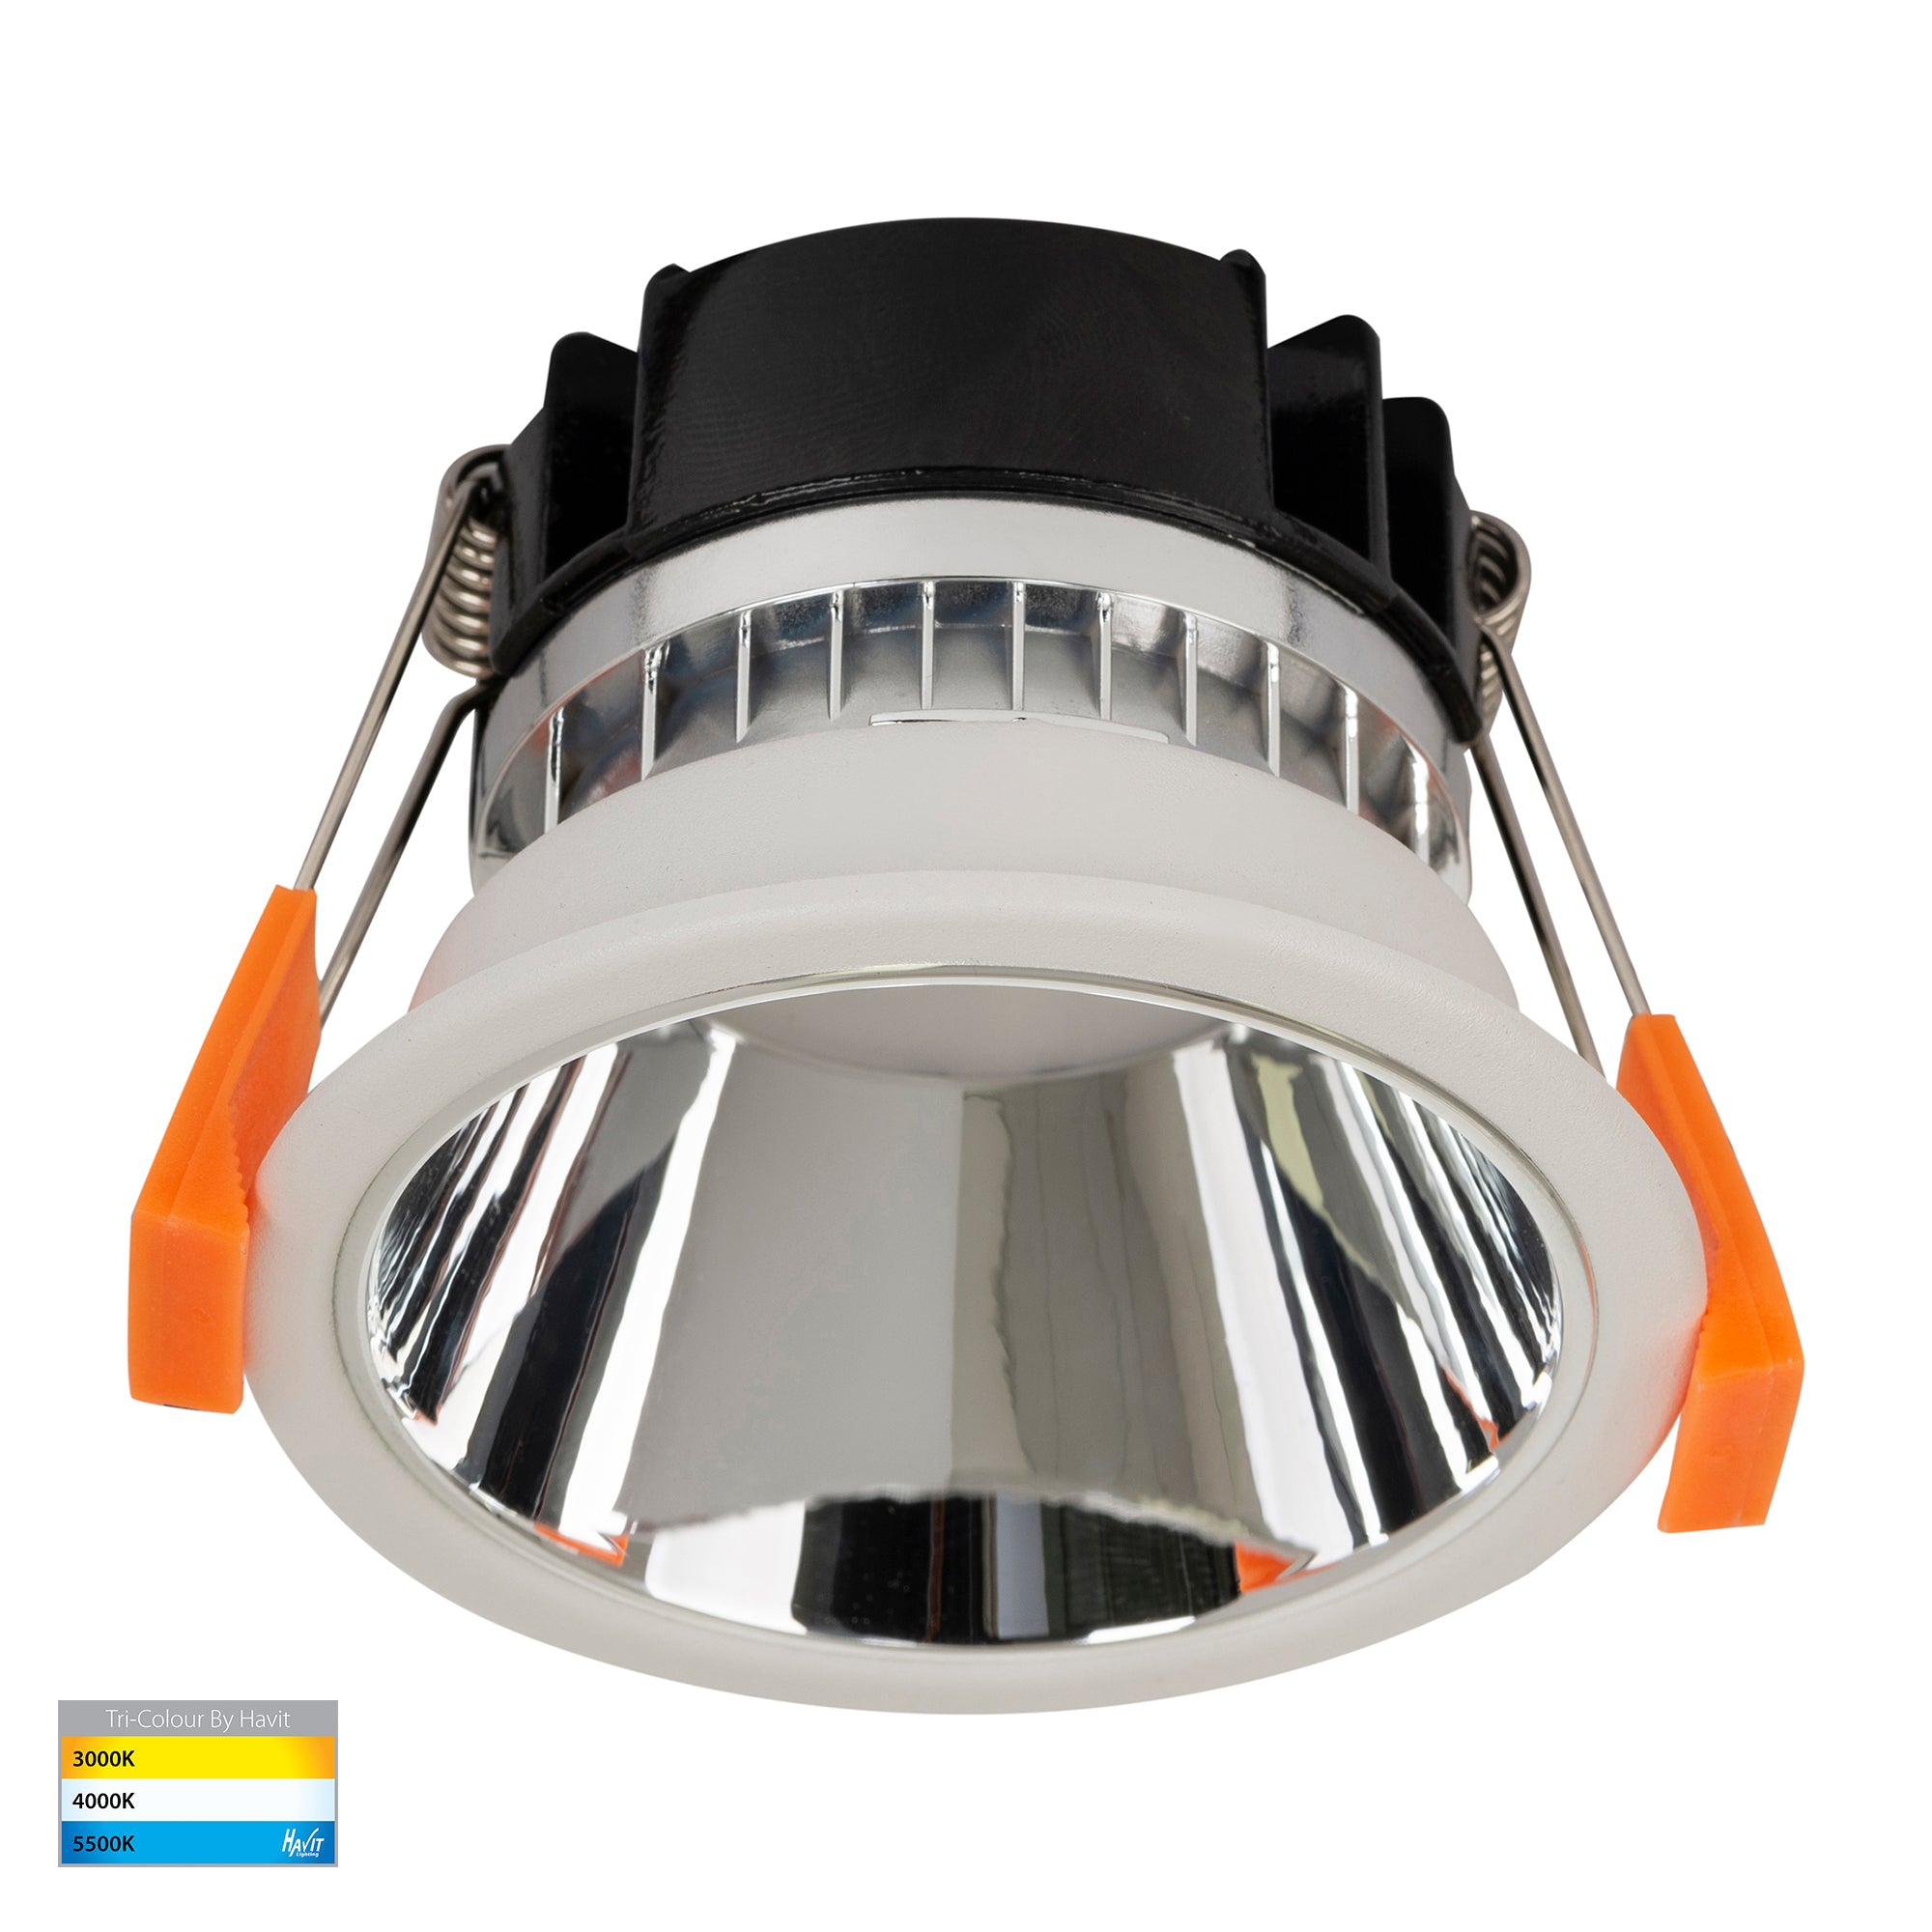 HV5529T-WC - Gleam White with Chrome Insert Tri Colour Fixed Deep LED Downlight